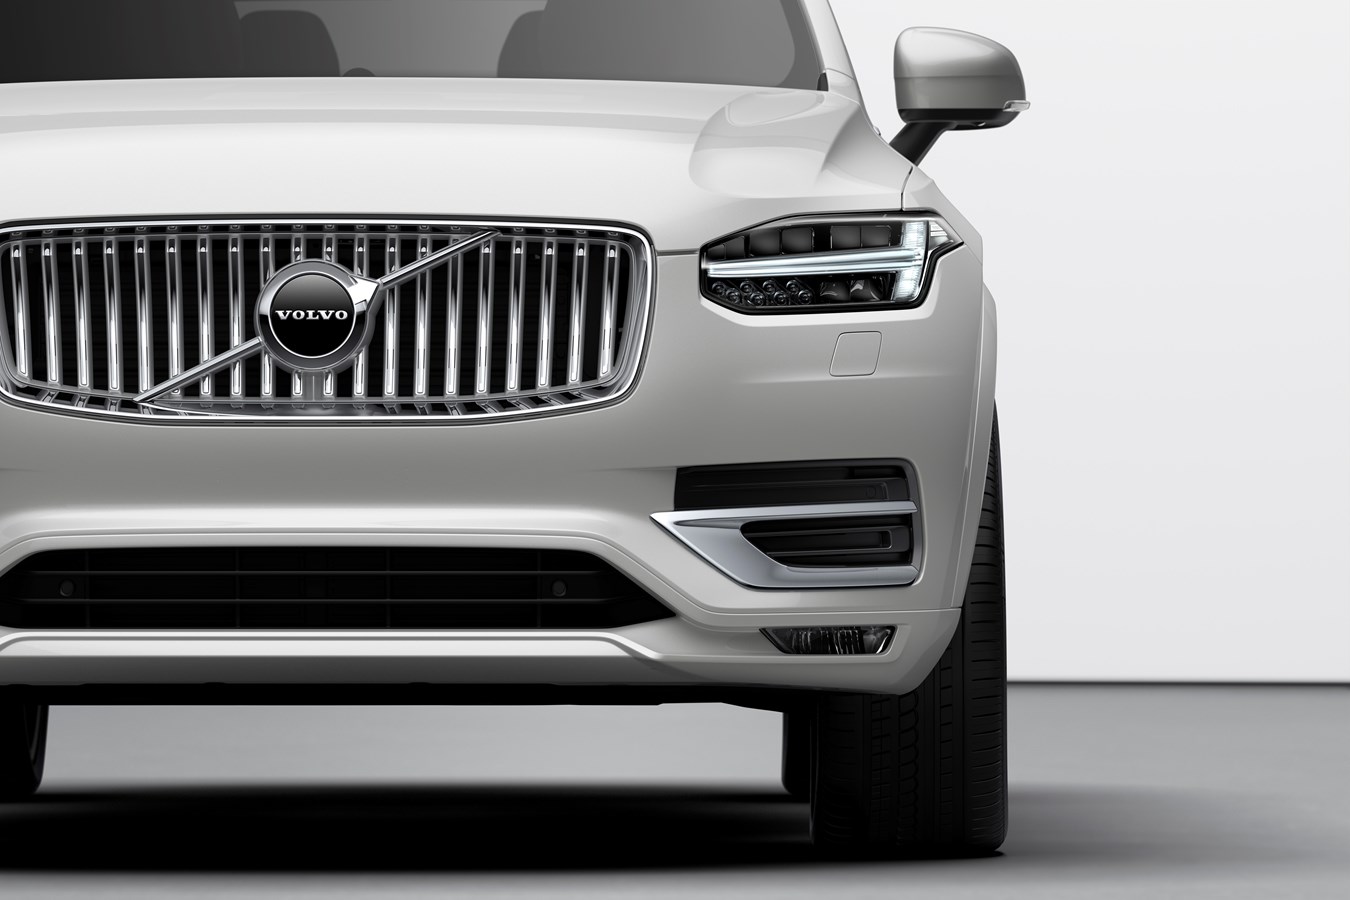 The refreshed Volvo XC90 Inscription T8 Twin Engine in Birch Light Metallic